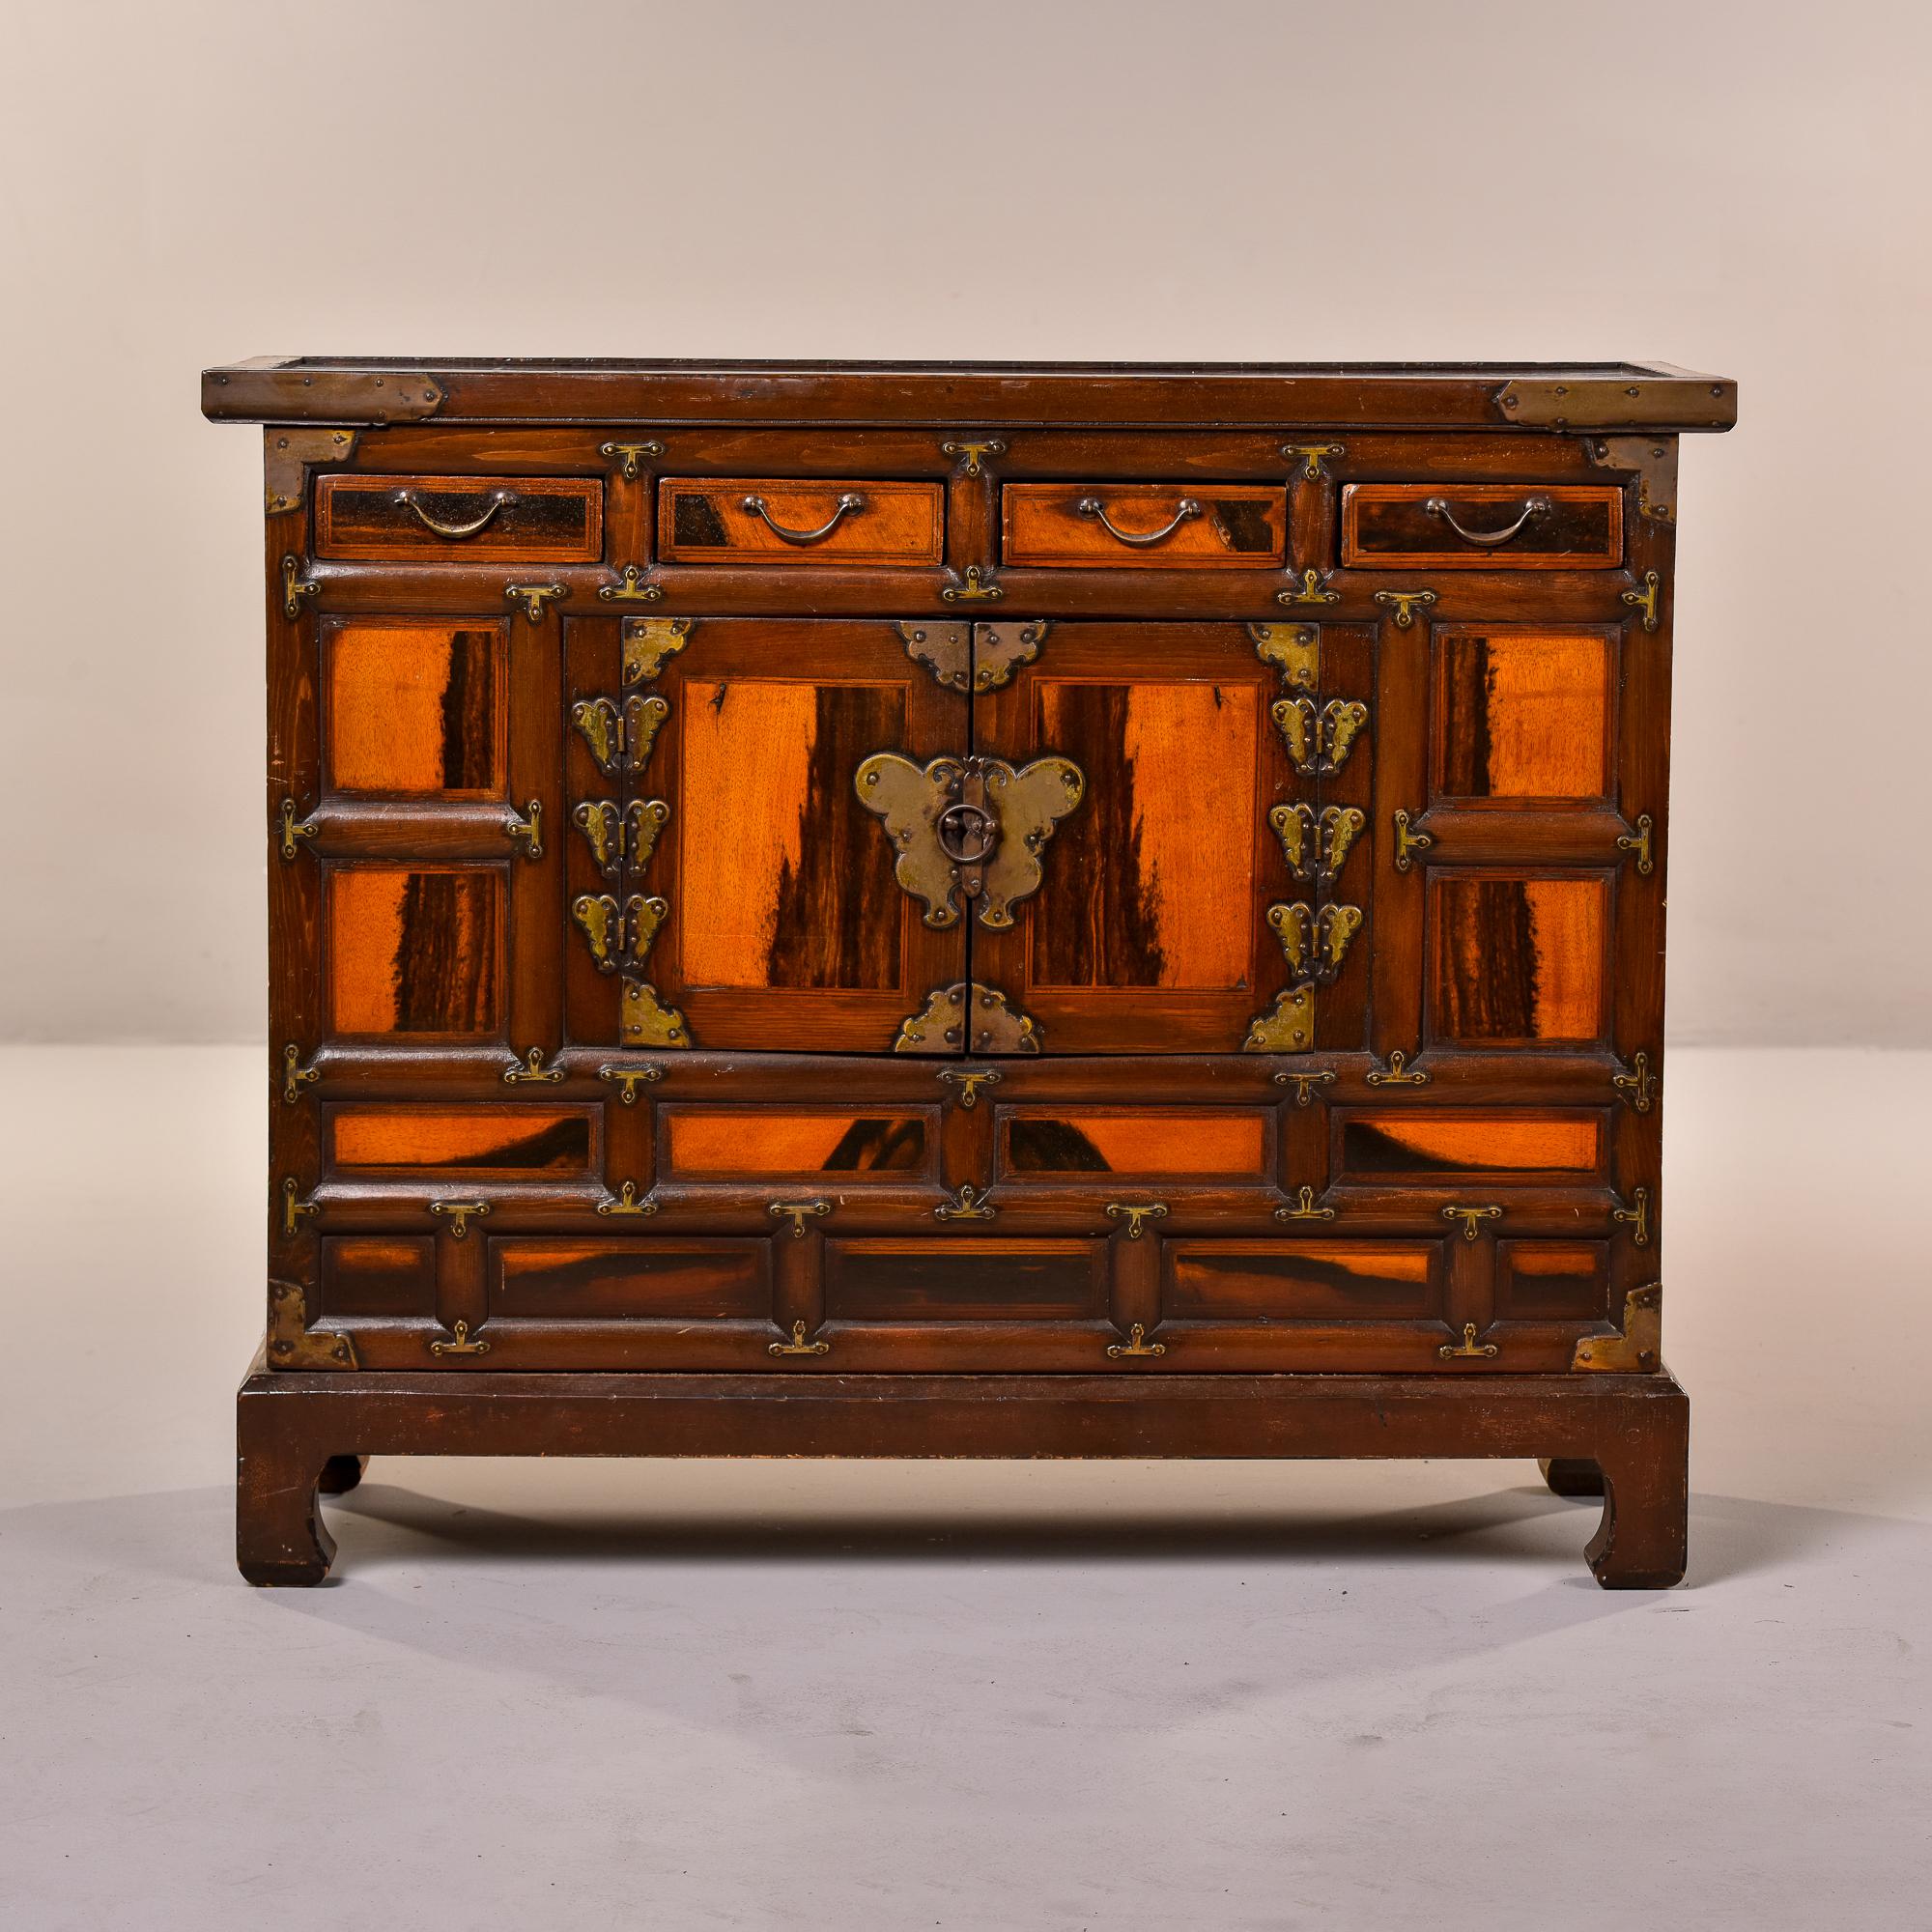 This circa 1950s small Chinese cabinet has four small drawers at the top, chow style feet and an open storage compartment with two hinged drawers. Adorned with decorative brass hardware including butterfly-shaped mounts on the front and wood stained